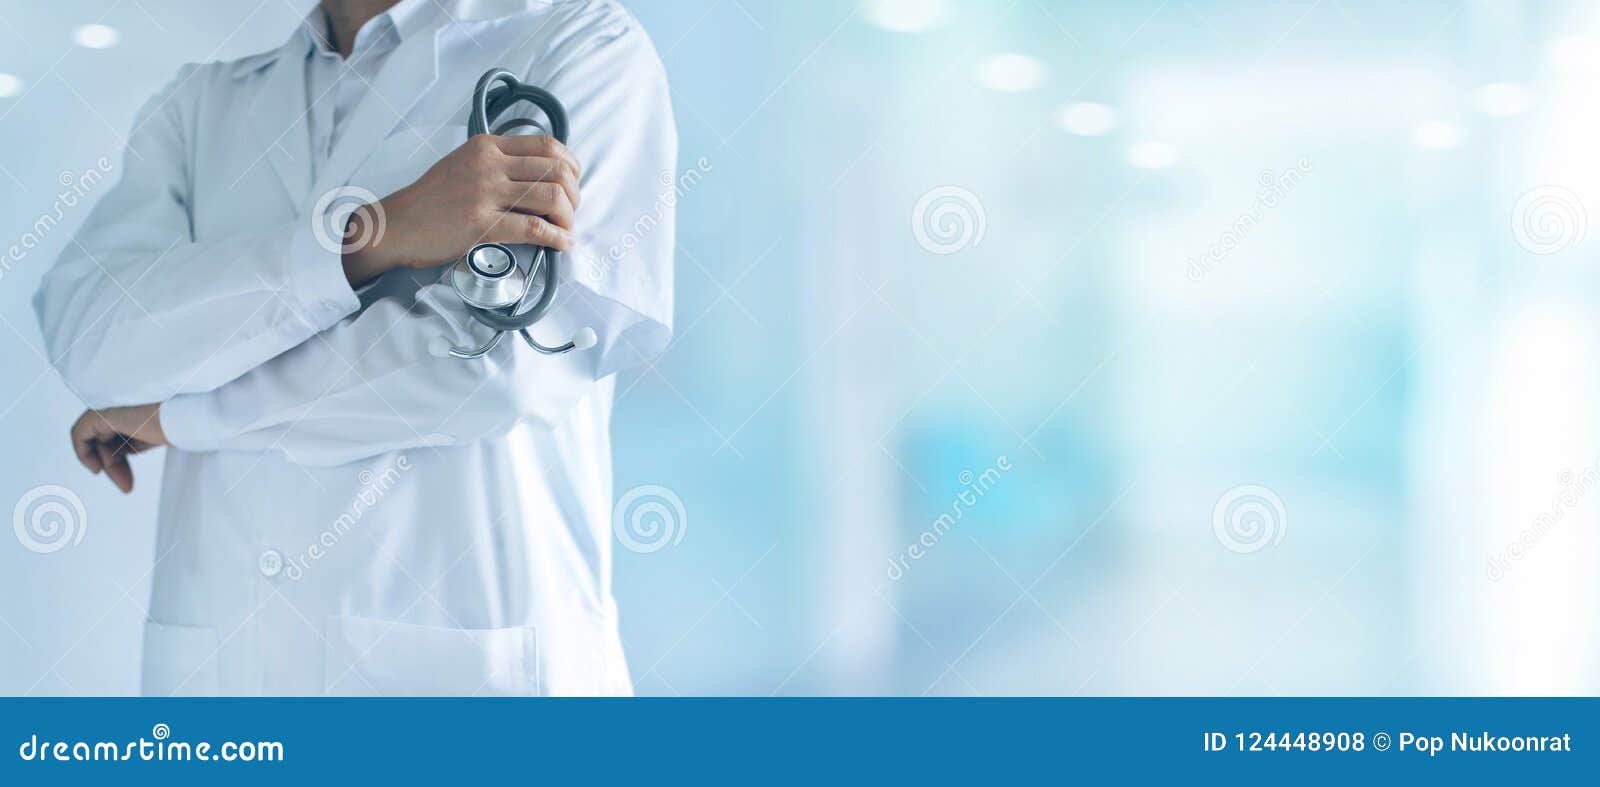 male medicine doctor with stethoscope standing confidently